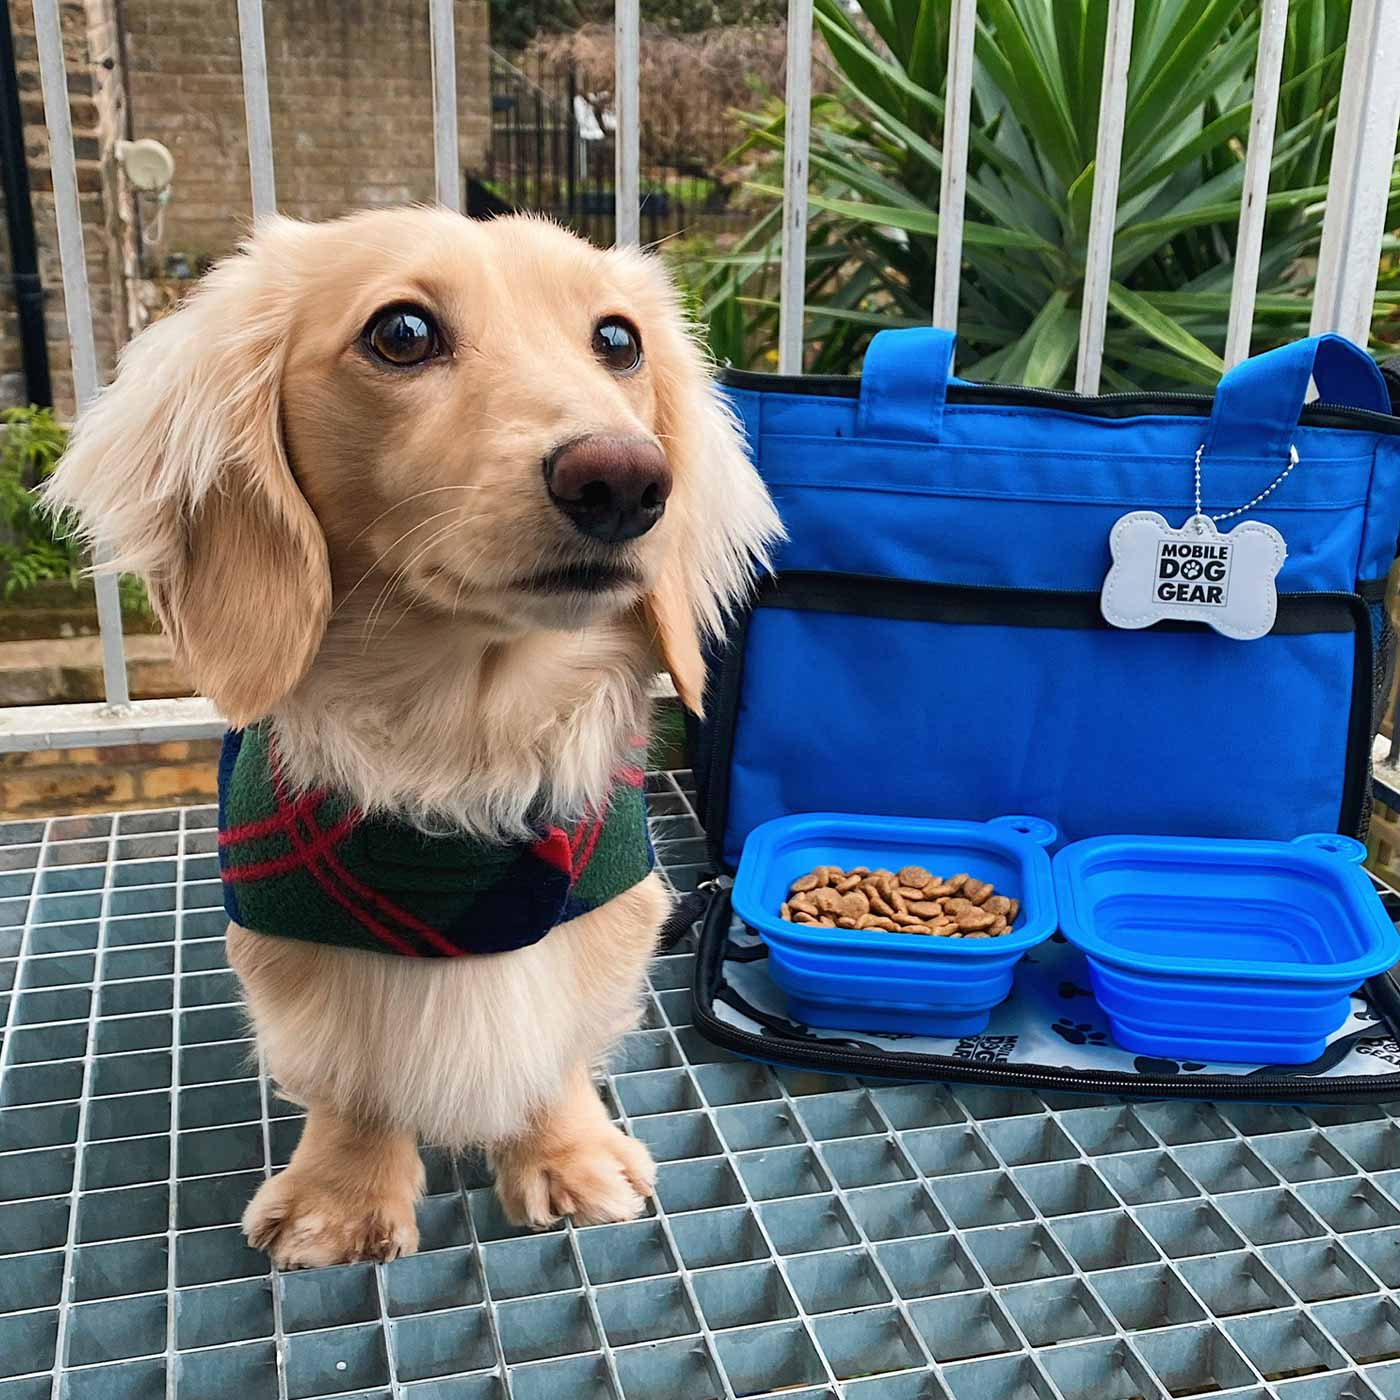 Discover, Mobile Dog Gear Week Away Bag, in Blue. The Perfect Away Bag for any Pet Parent, Featuring dividers to stack food and built in waste bag dispenser. Also Included feeding set, collapsible silicone bowls and placemat! The Perfect Gift For travel, meets airline requirements. Available Now at Lords & Labradors